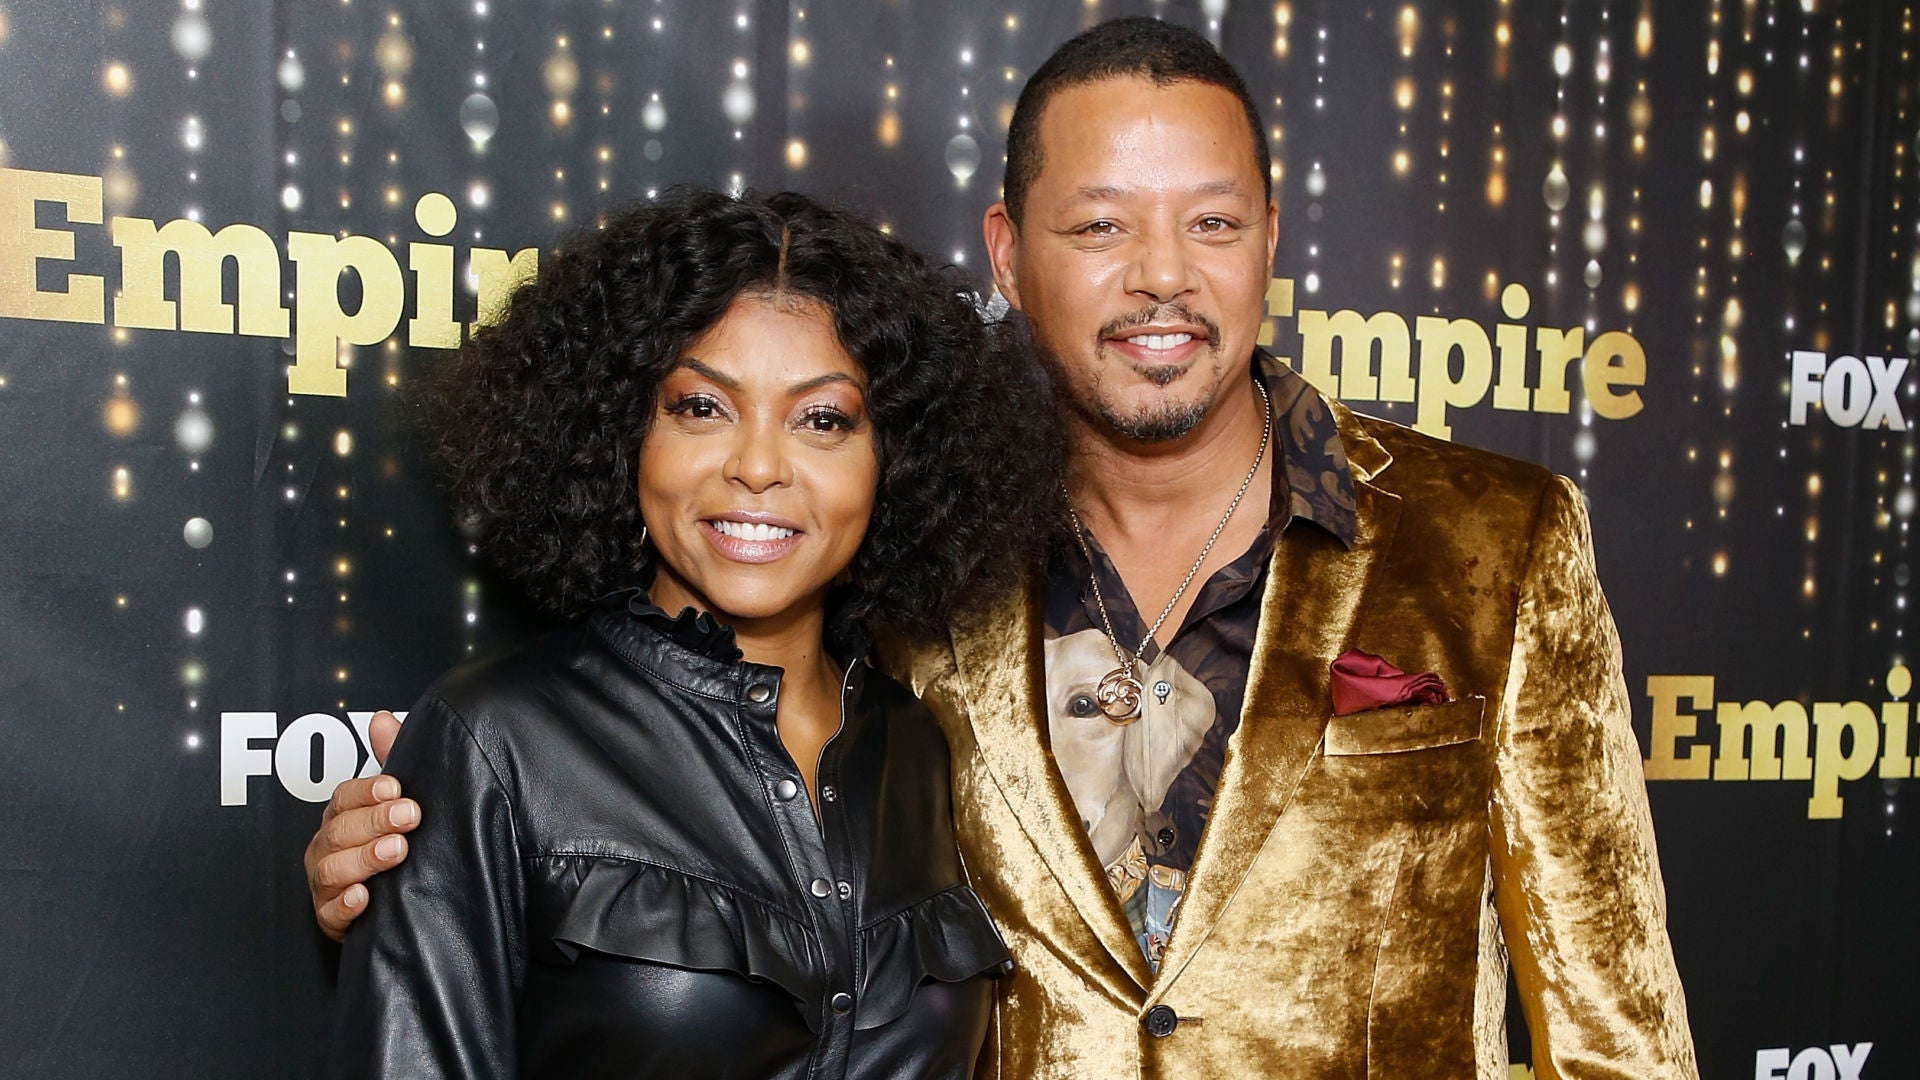 'Empire' Cast Pens Letter In Support Of Jussie Smollett, Wants Him To Return Next Season